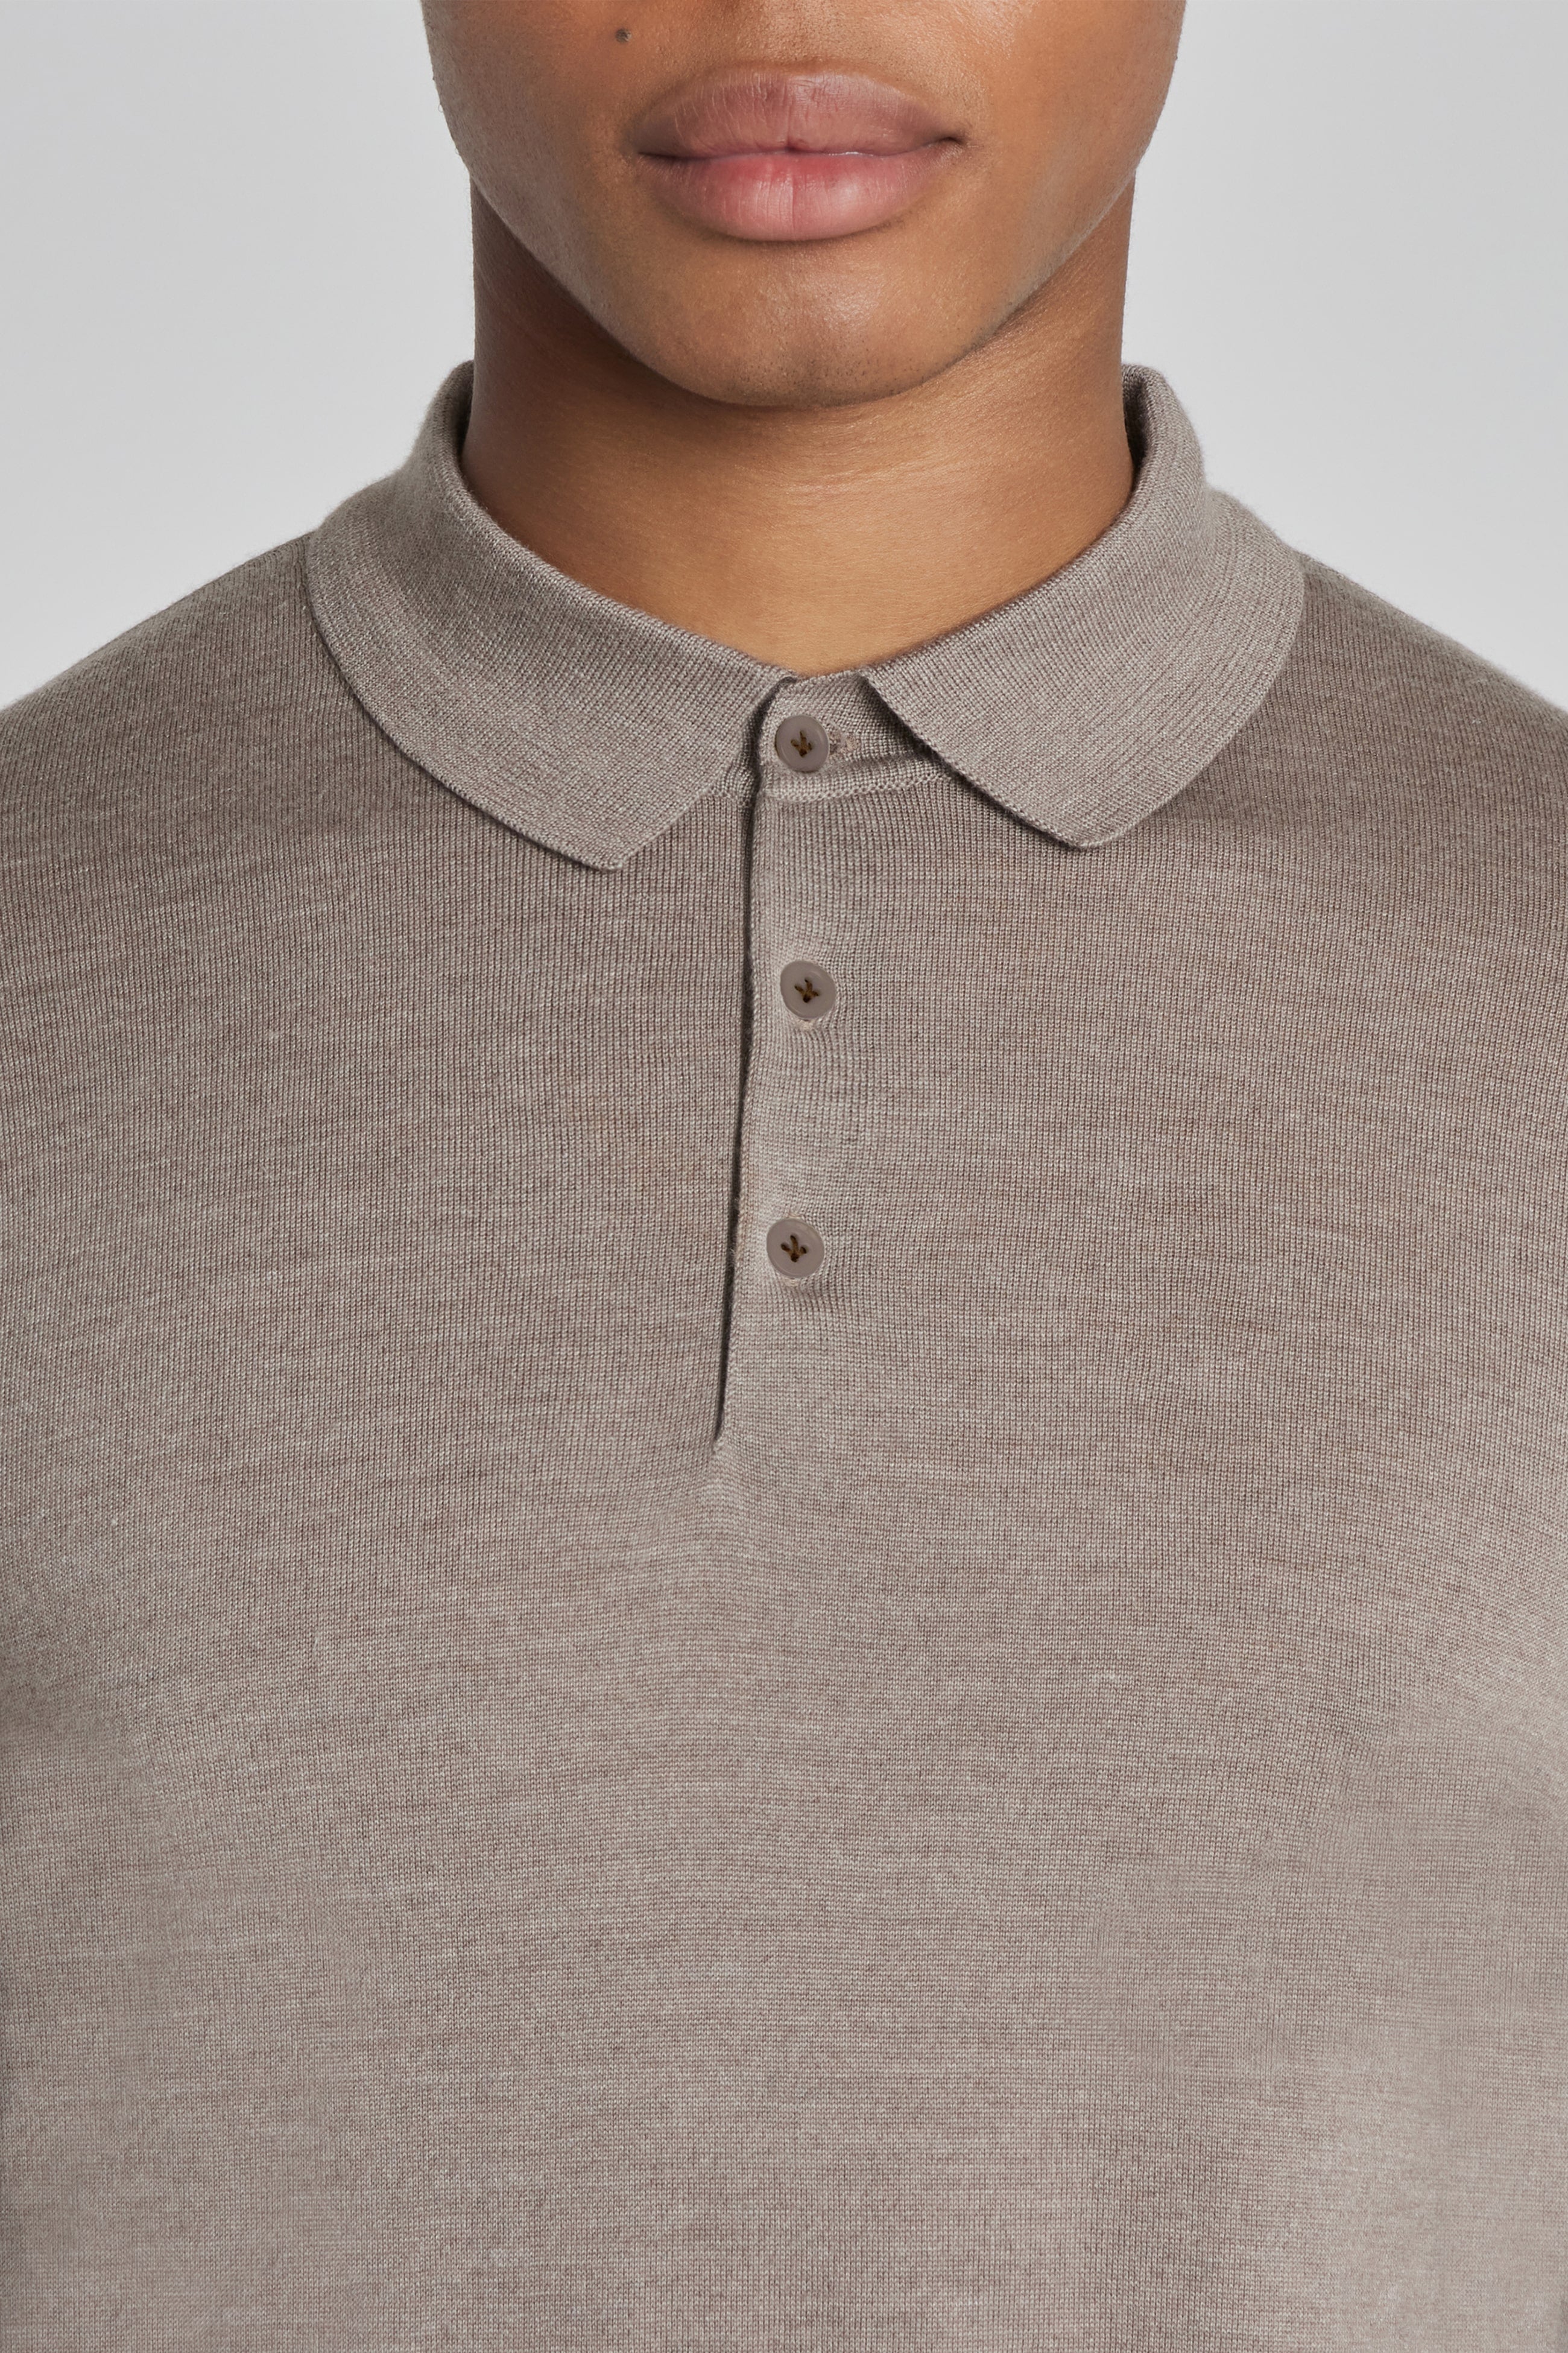 Alt view 1 Redfern Wool, Silk and Cashmere Long Sleeve Polo in Tan